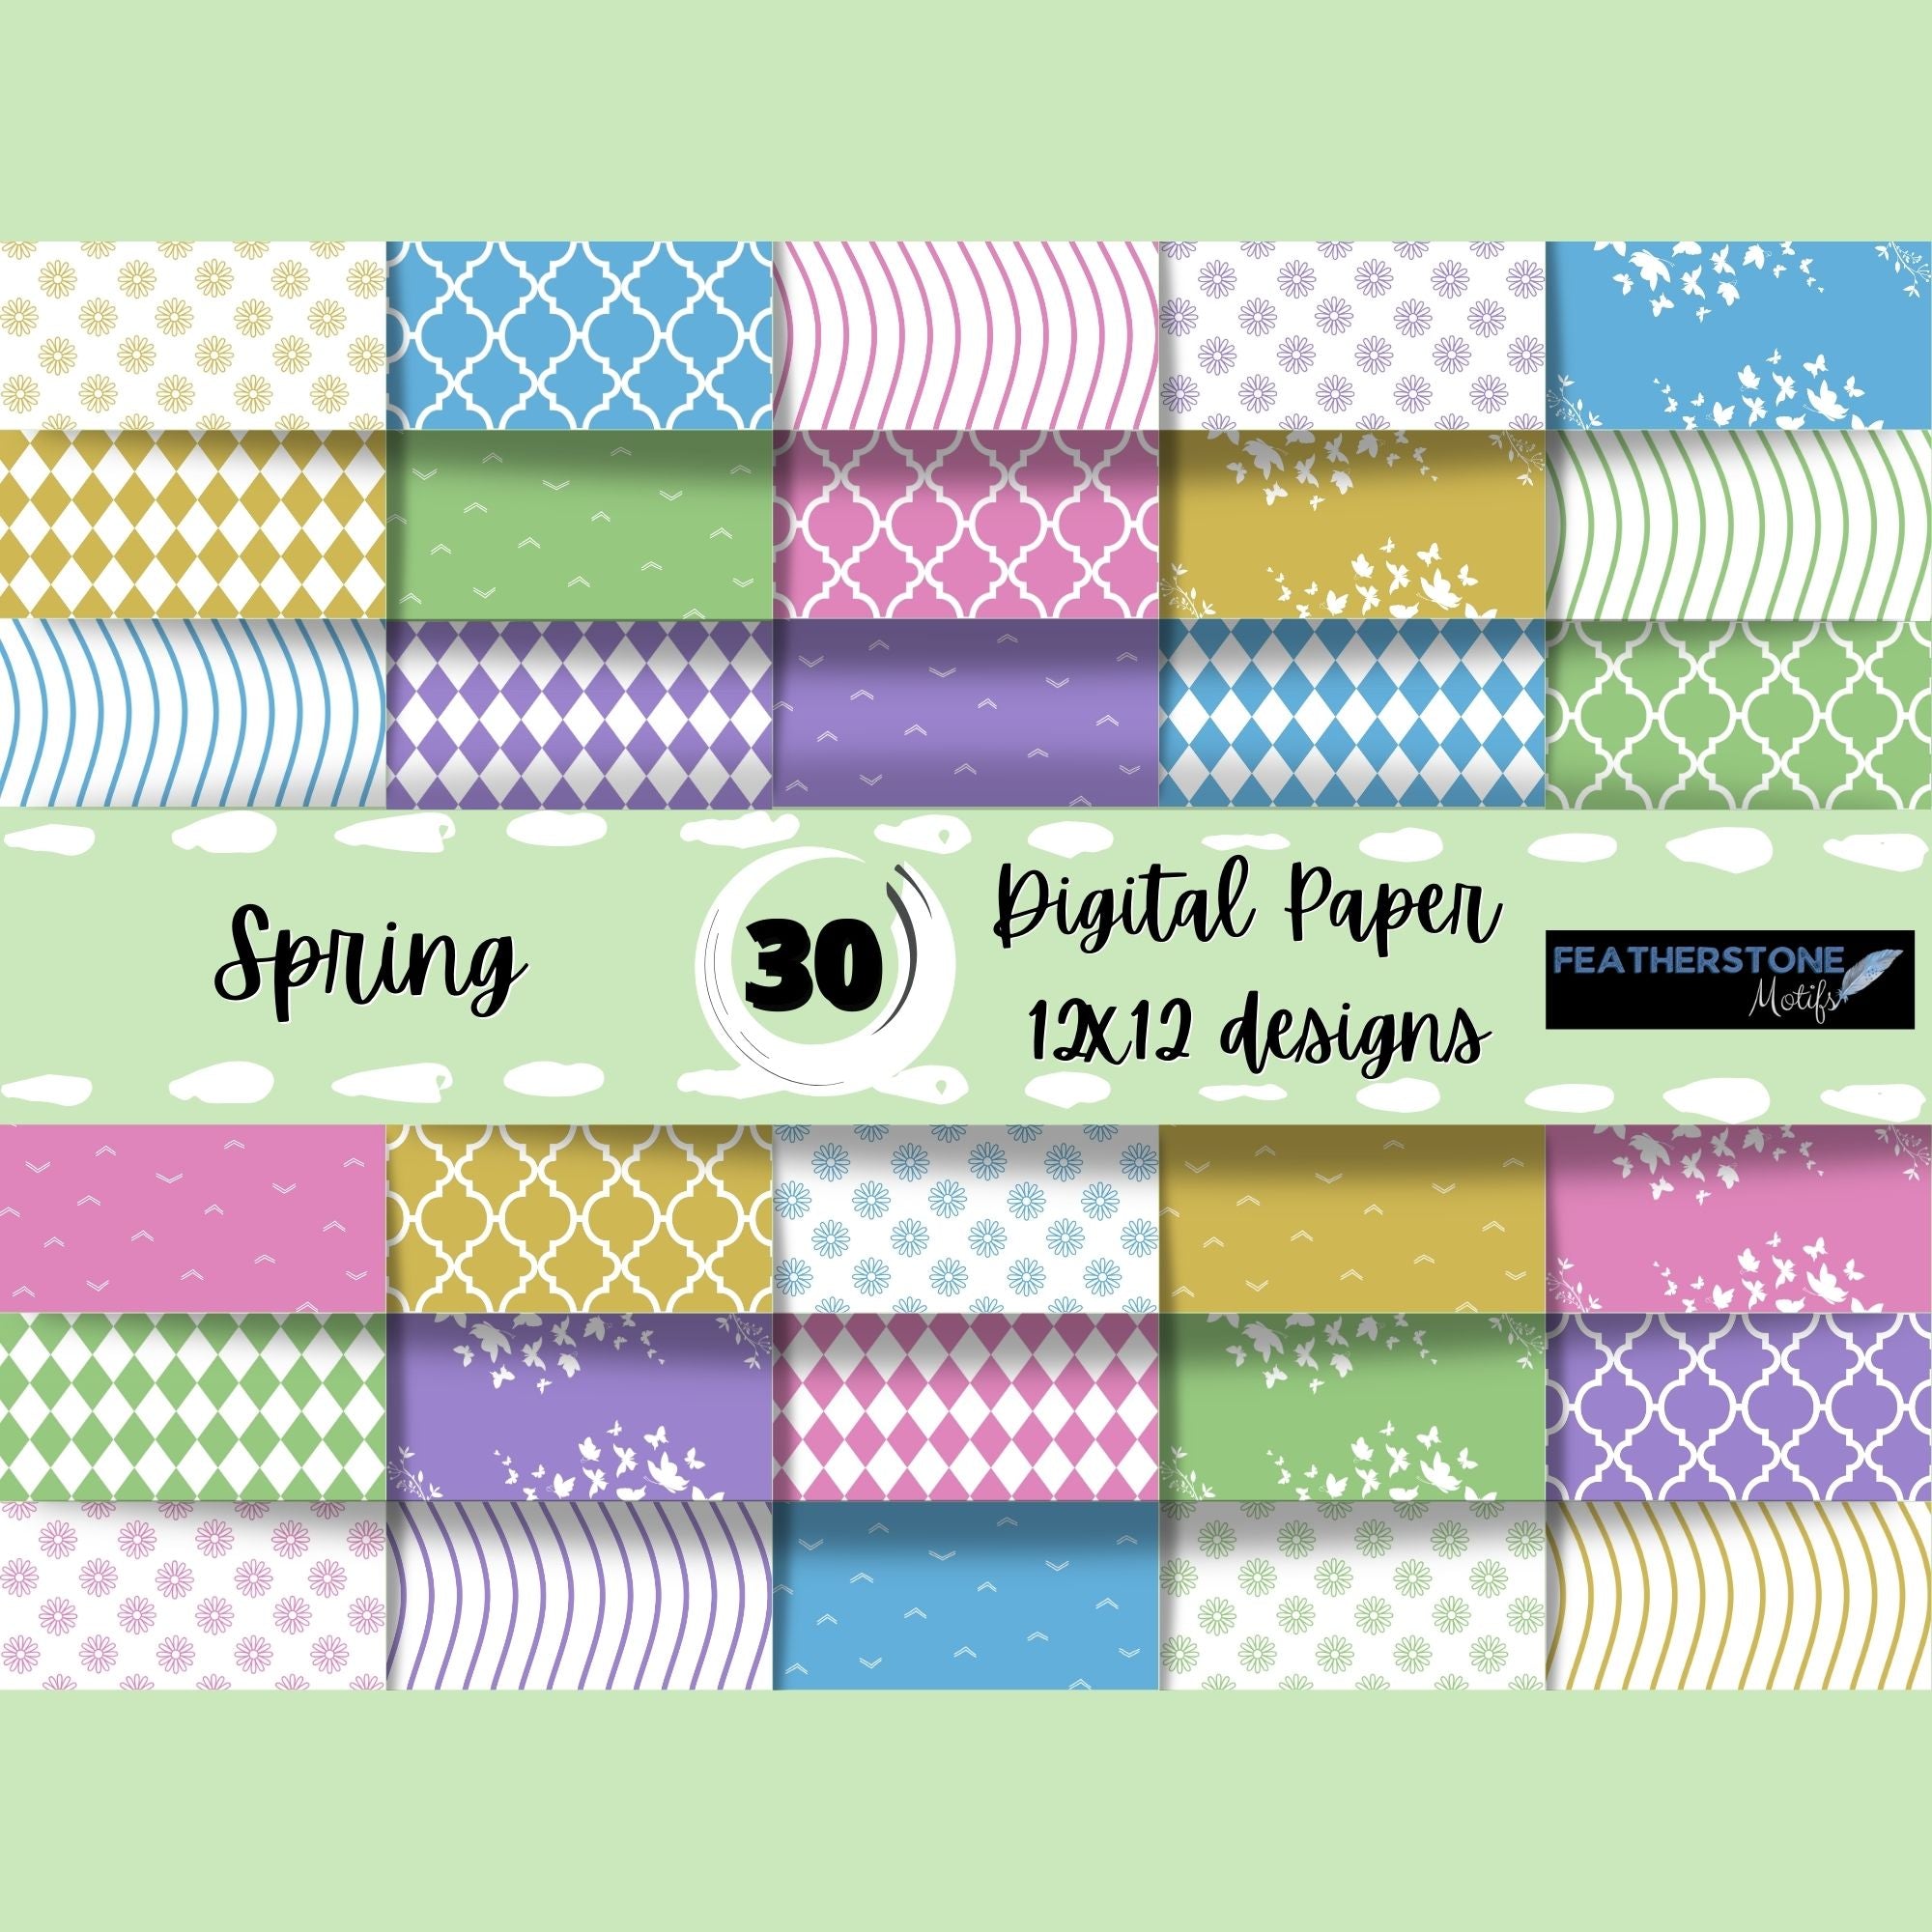 Scrapbookers, this is what you've been looking for! This springtime themed bundle has 30 unique images that can be printed or used as digital backgrounds.